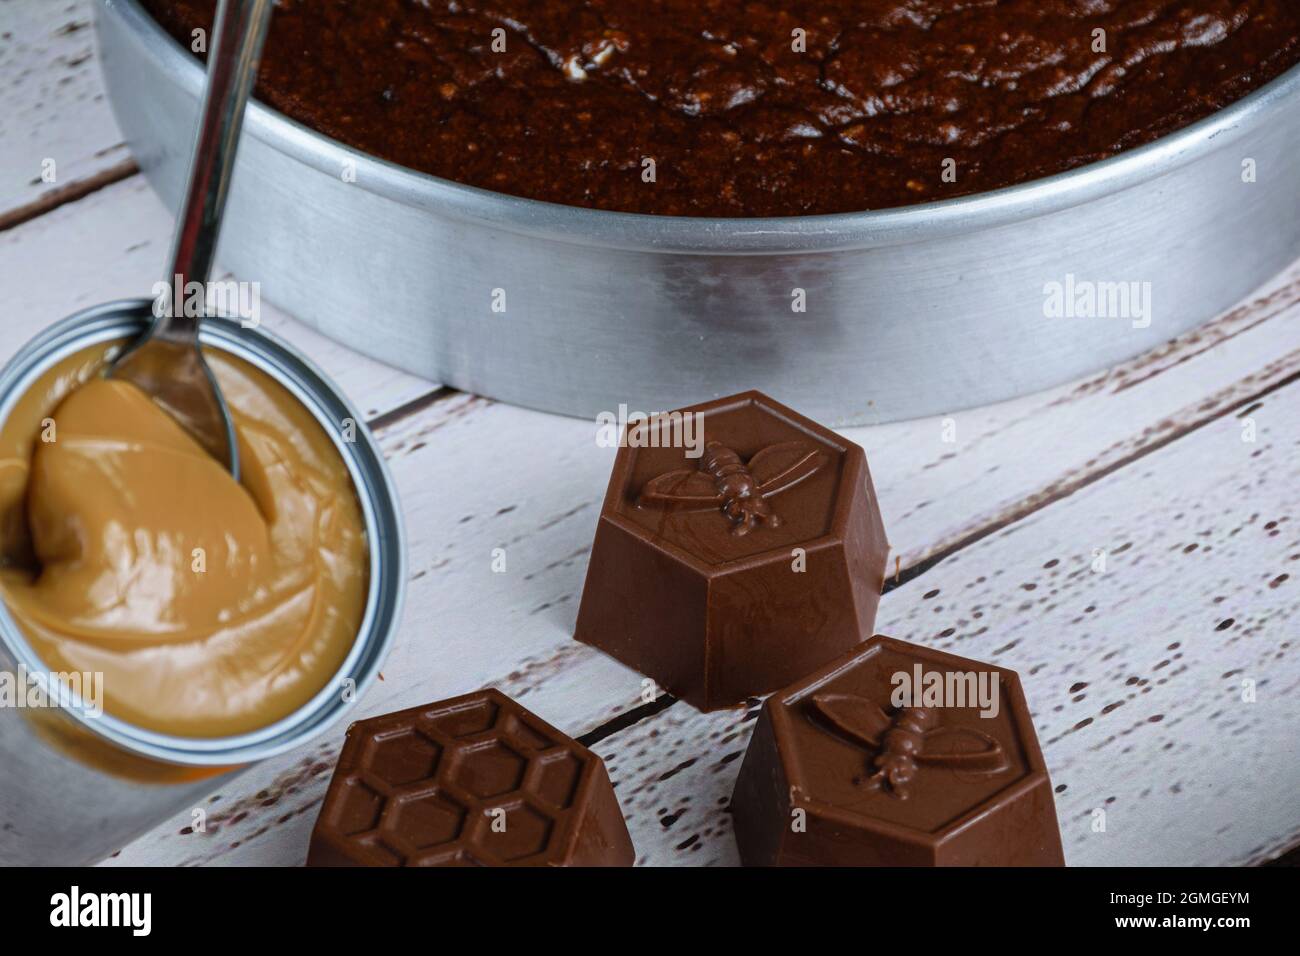 Small chocolate molds for making Brazilian honey cake, next to a can of dulce de leche. Stock Photo